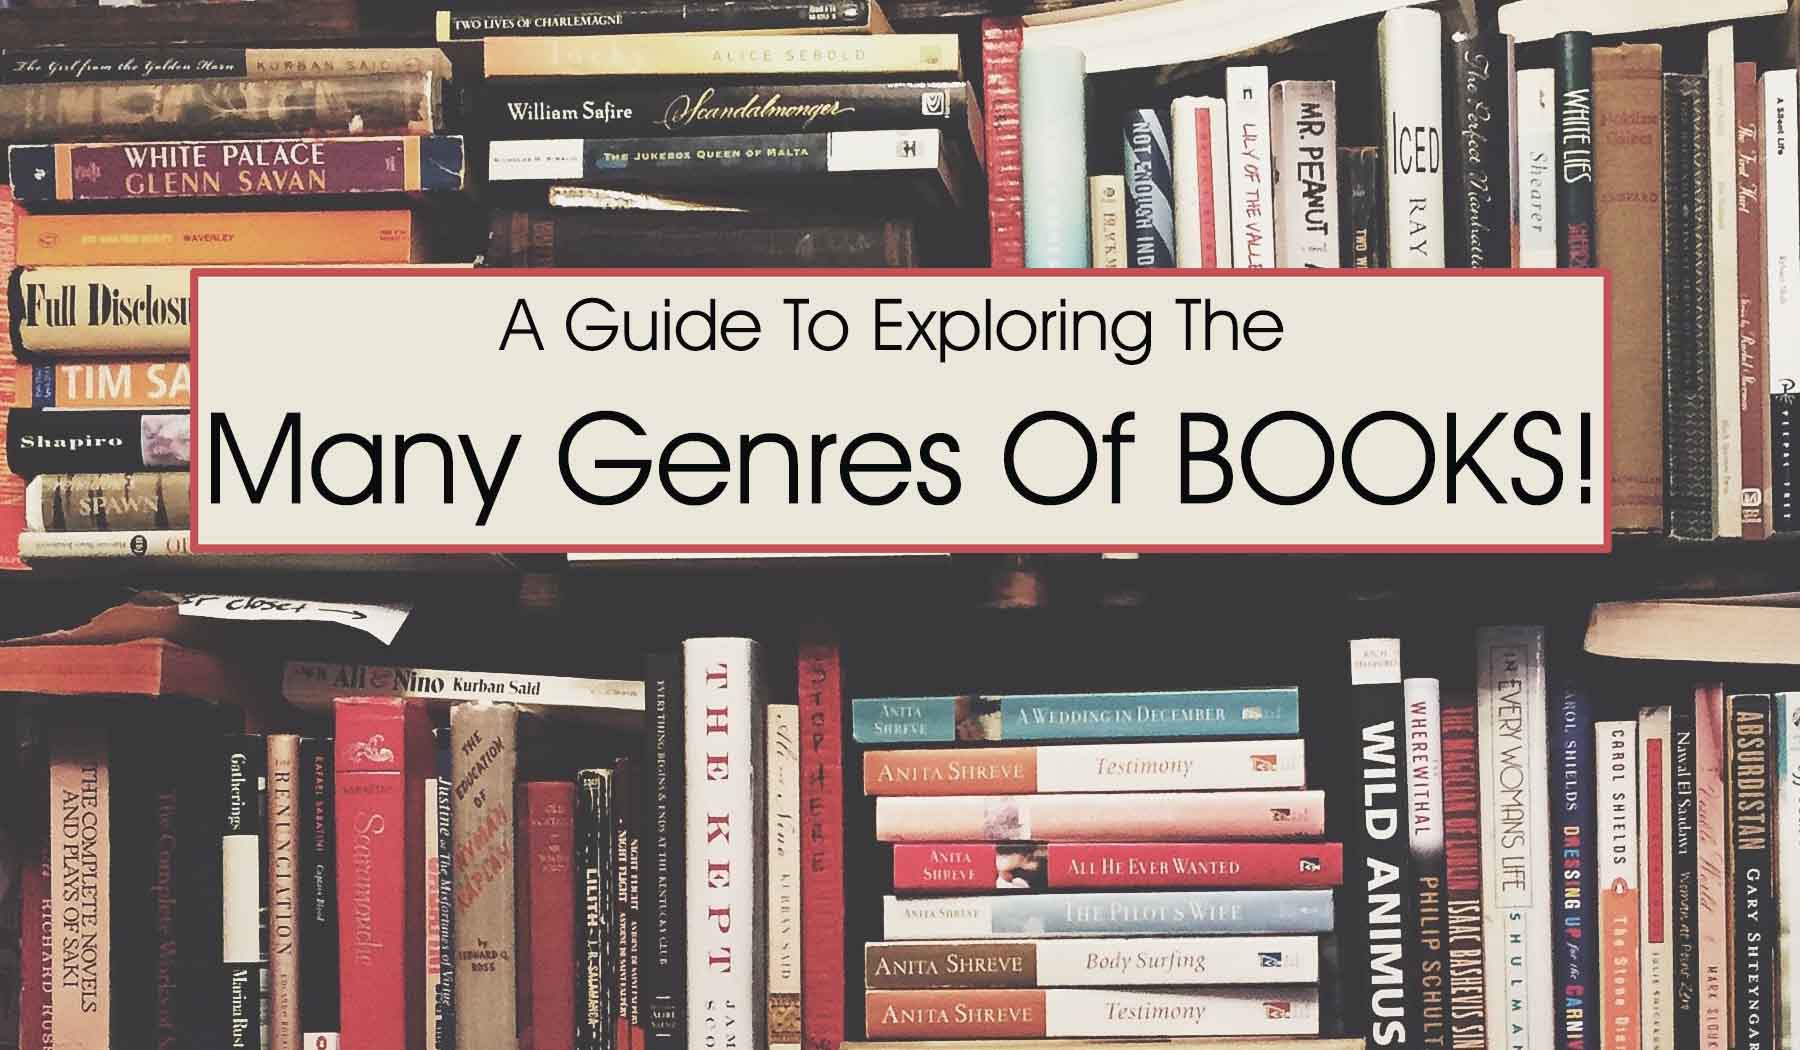 all the genres of books